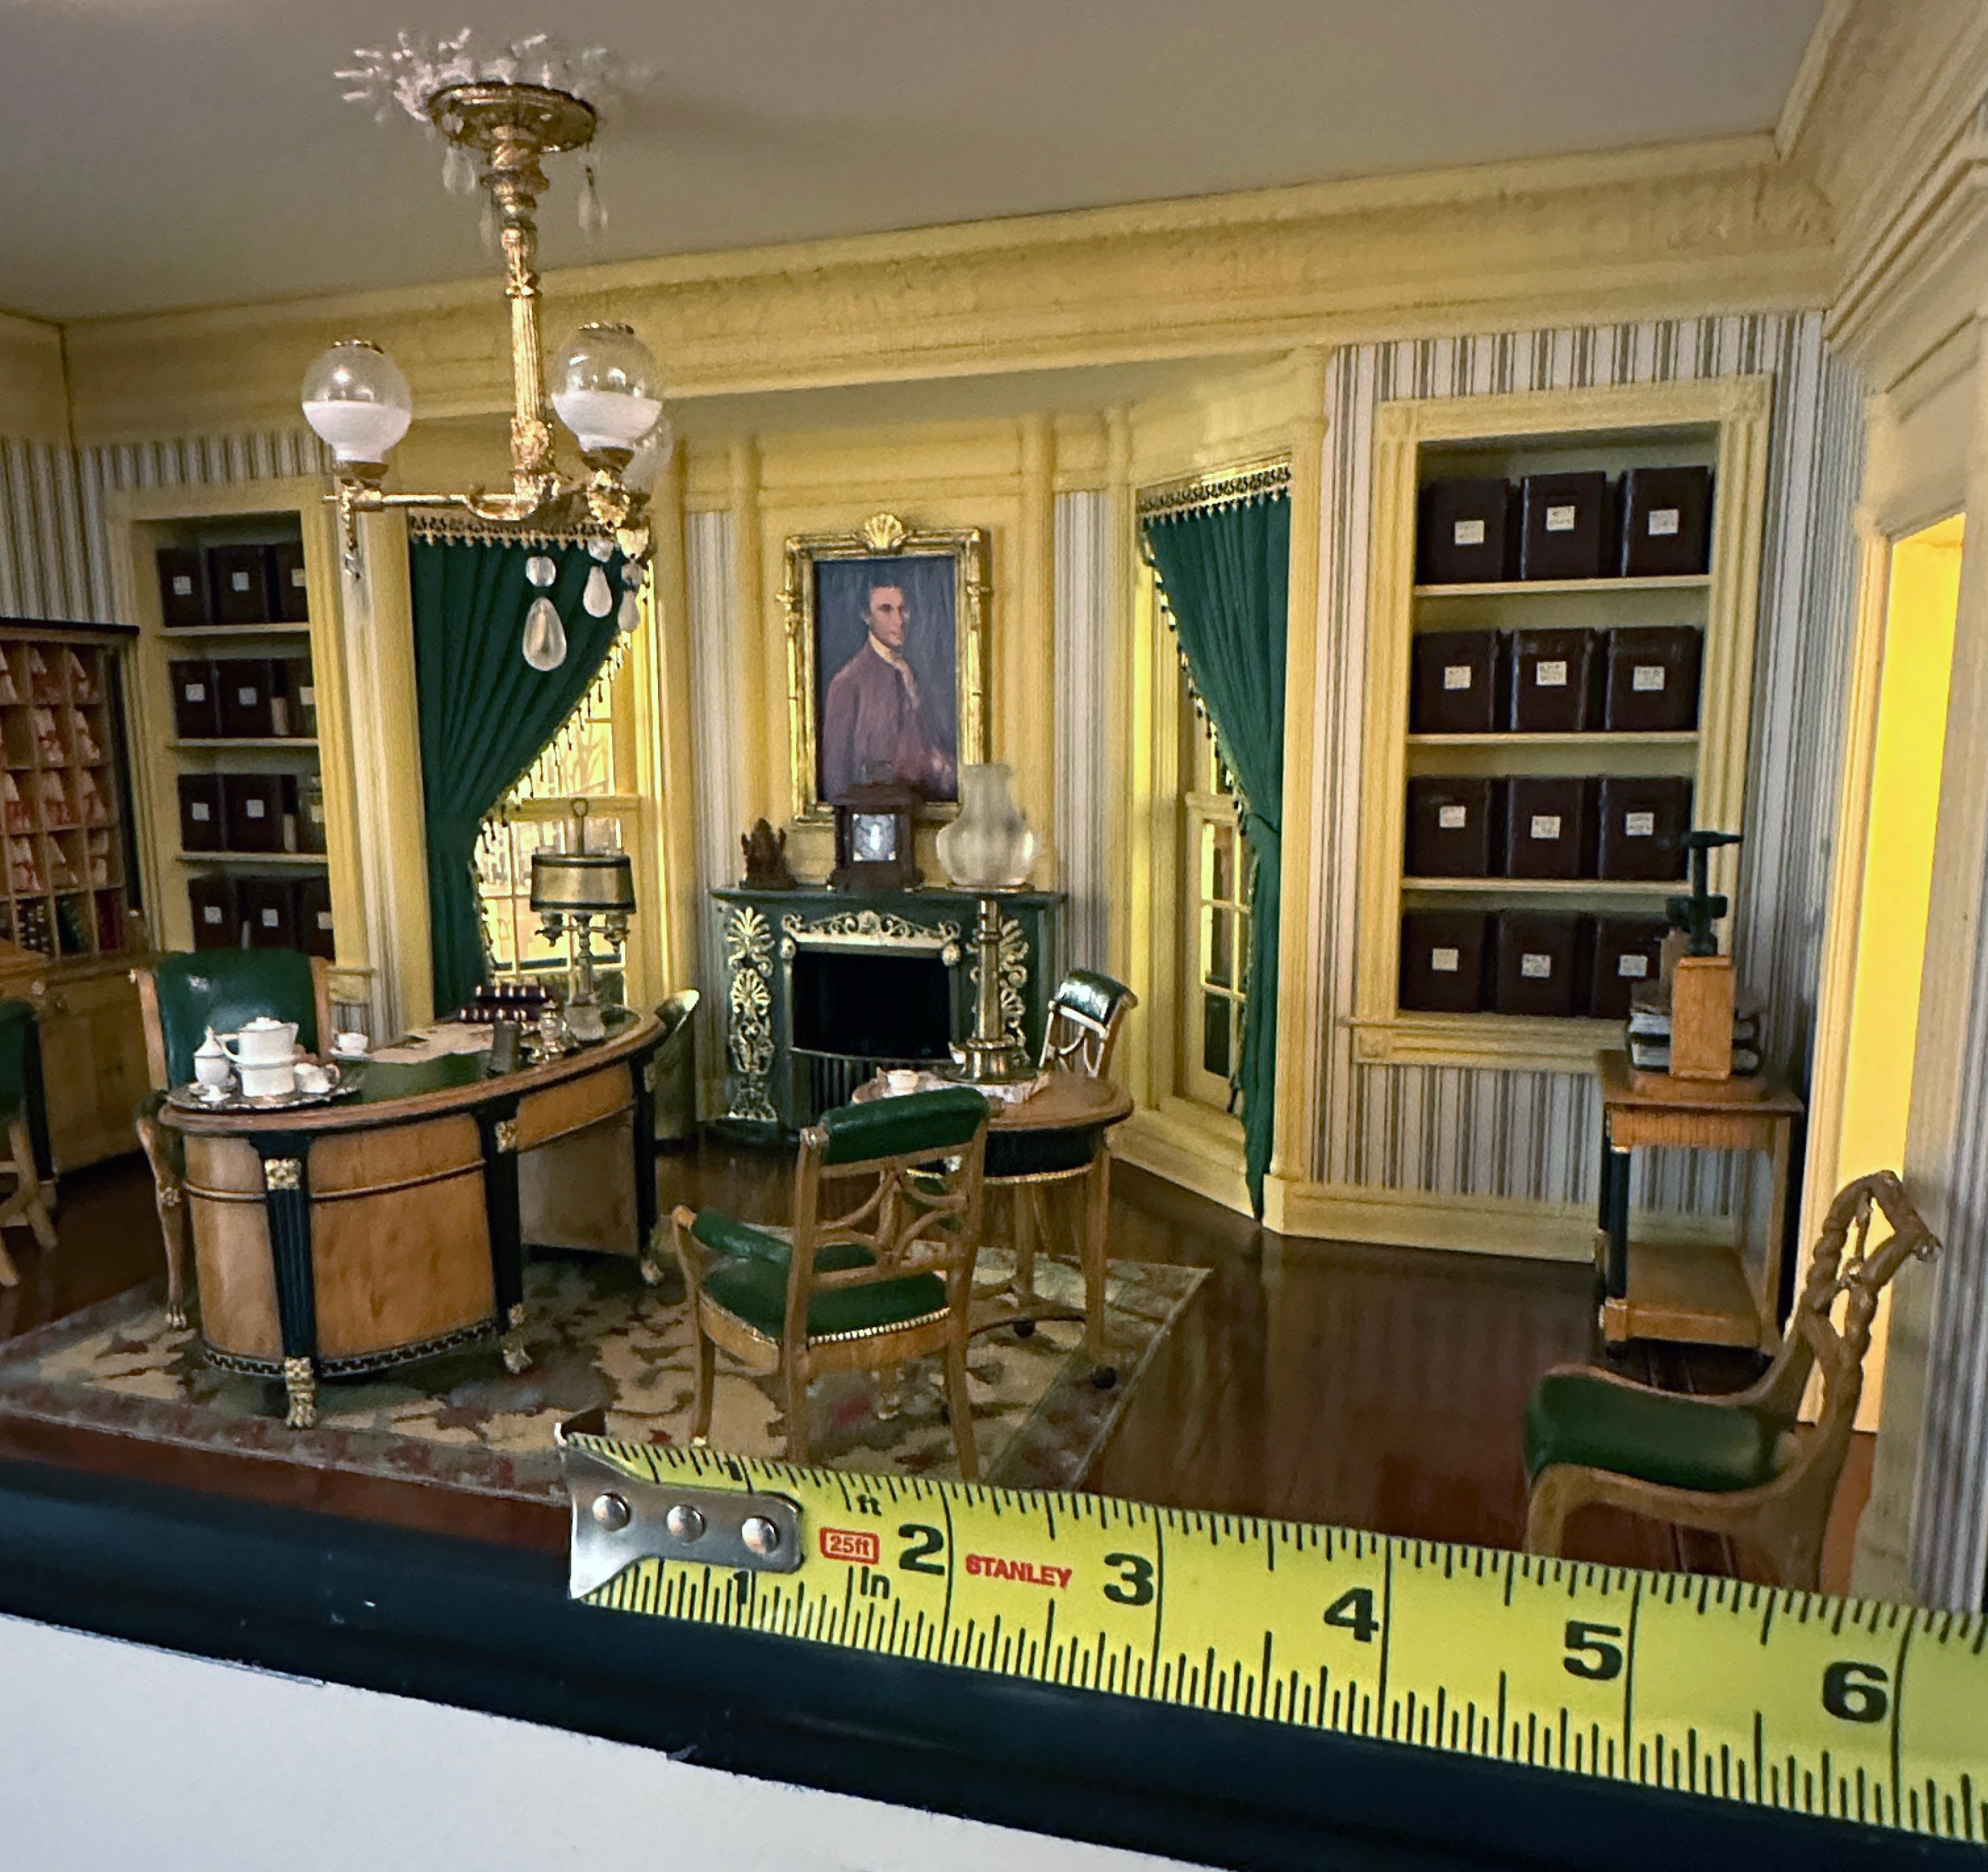 Lawyer's Office Circa 1835 - Kupjack Studios Miniature Room - Sculpture by Henry 